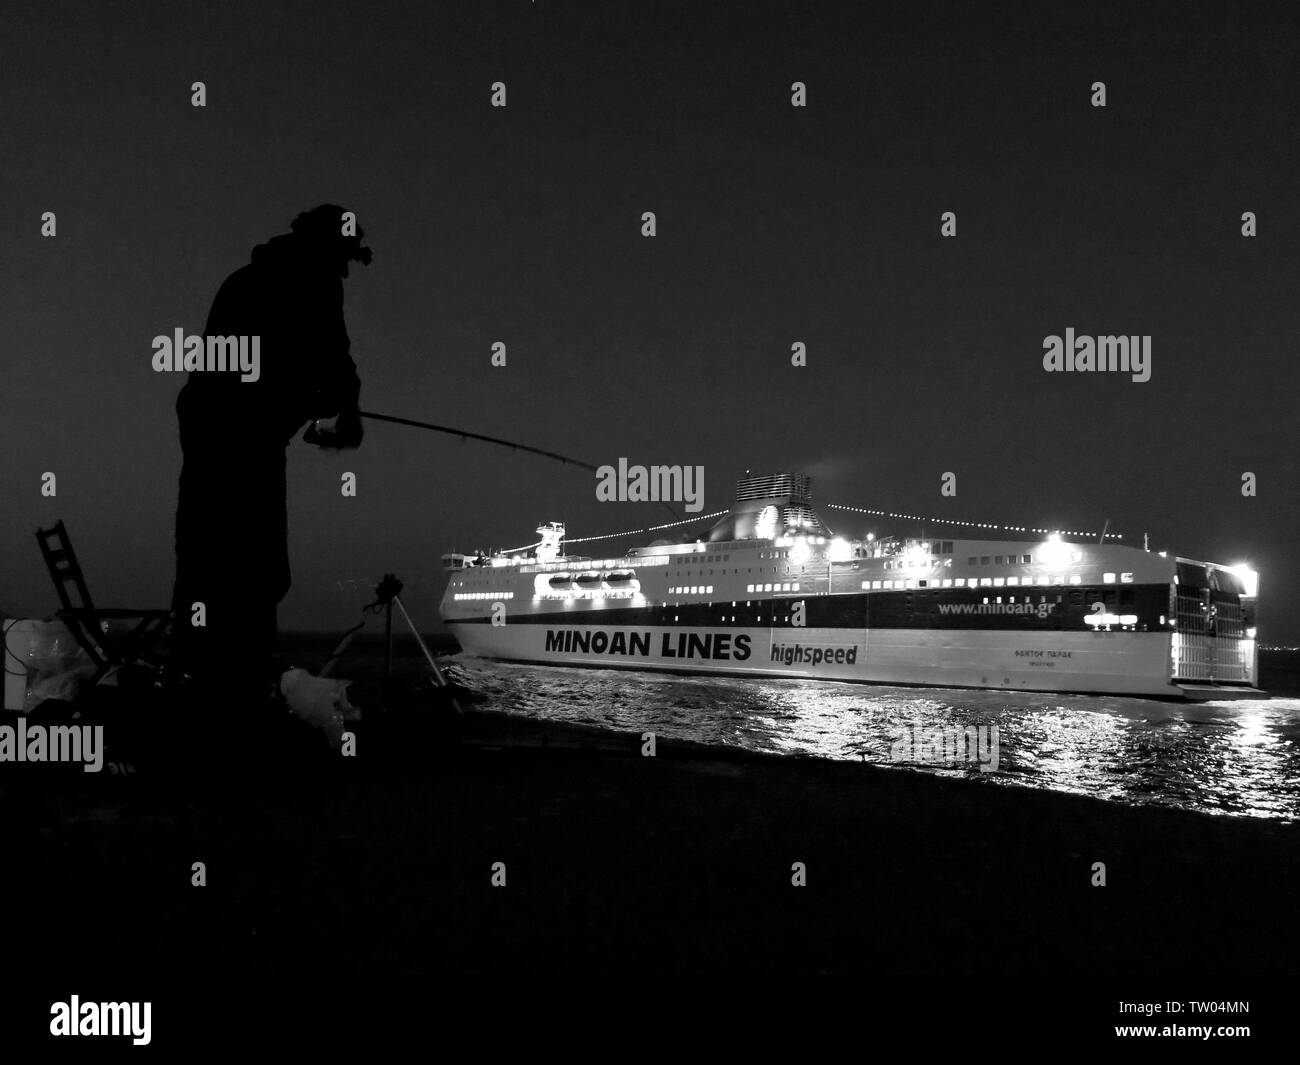 Silhouette of a man fishing from the pier with a Minoan lines ship exiting the harbour in the background. Heraklion, Crete, Greece. Stock Photo